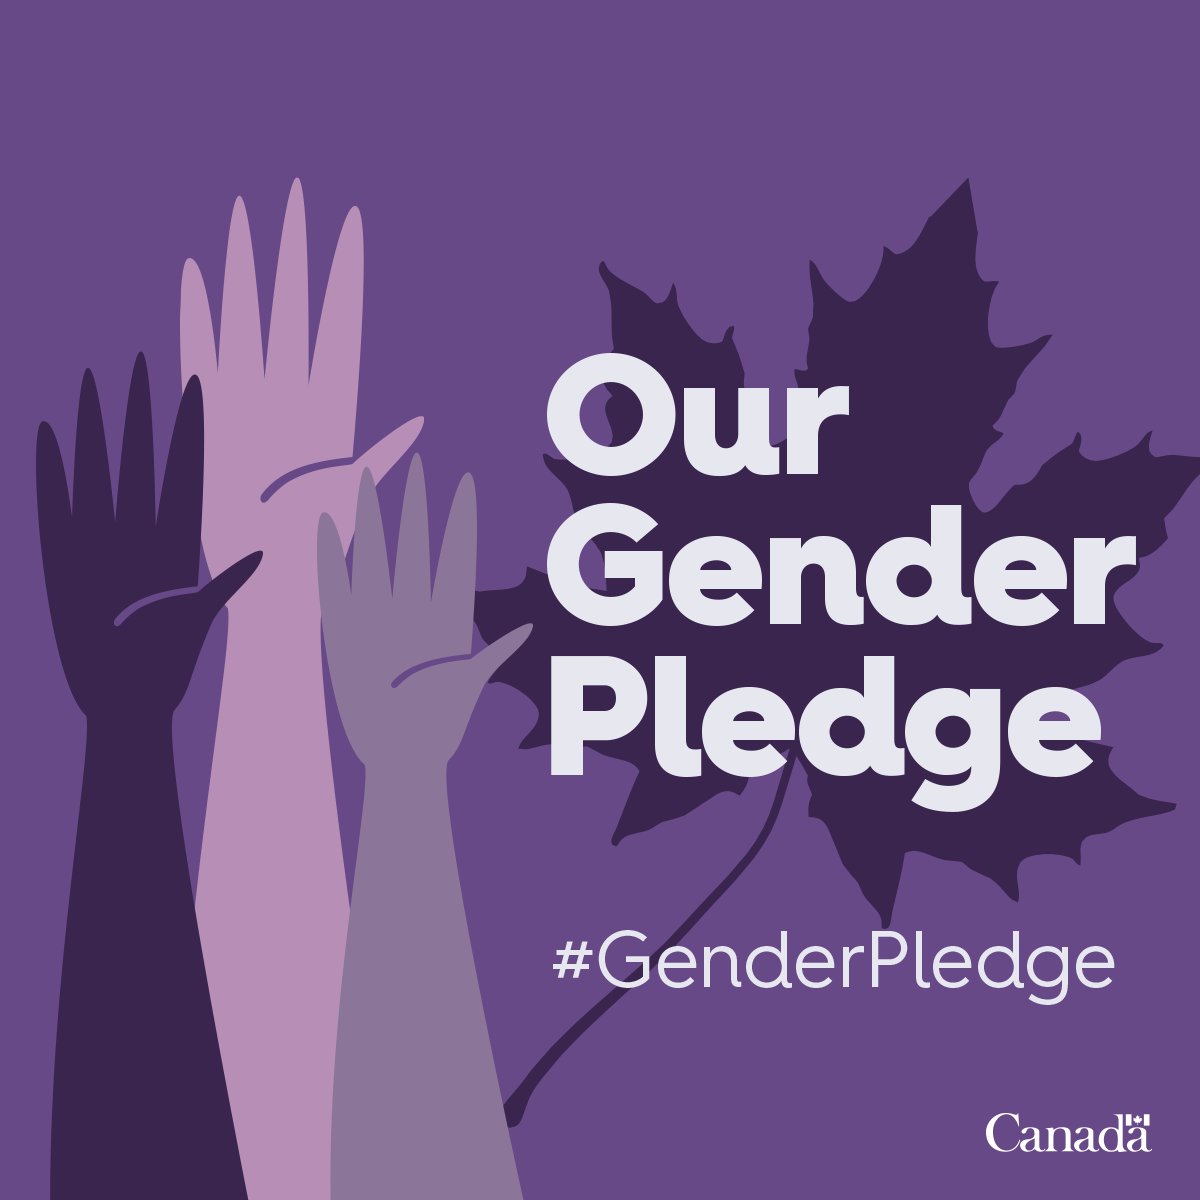 We can ALL take steps to advance #GenderEquality. This year, we're making a #GenderPledge to support the full political empowerment of women at all levels.
#KenyaDecides #SheCanLead